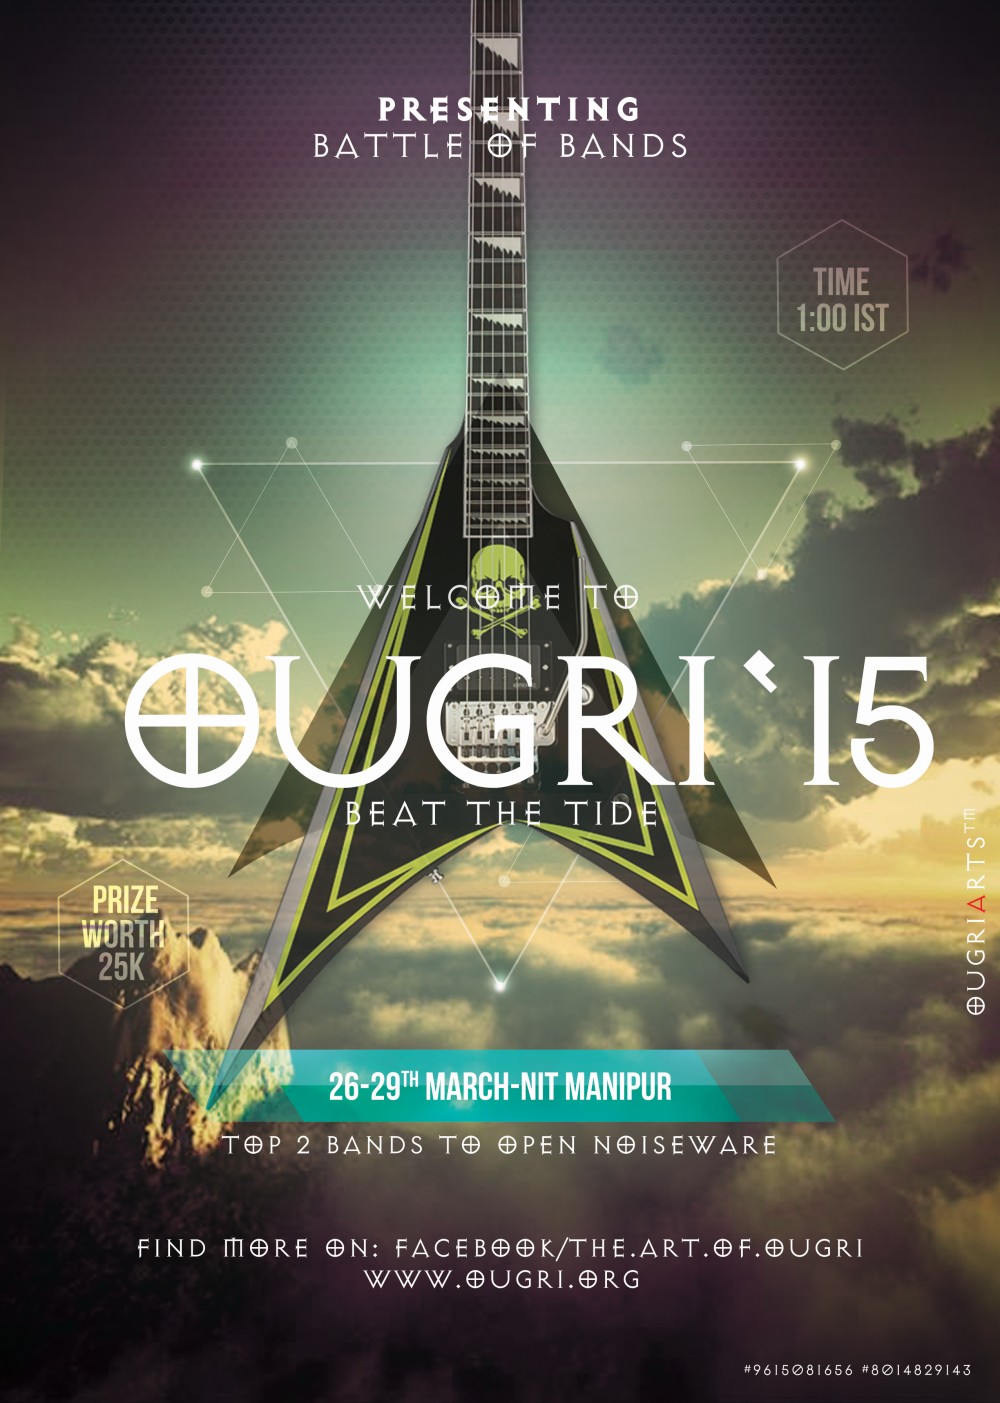   Battle of Bands : Ourgri '15 at NIT Manipur  